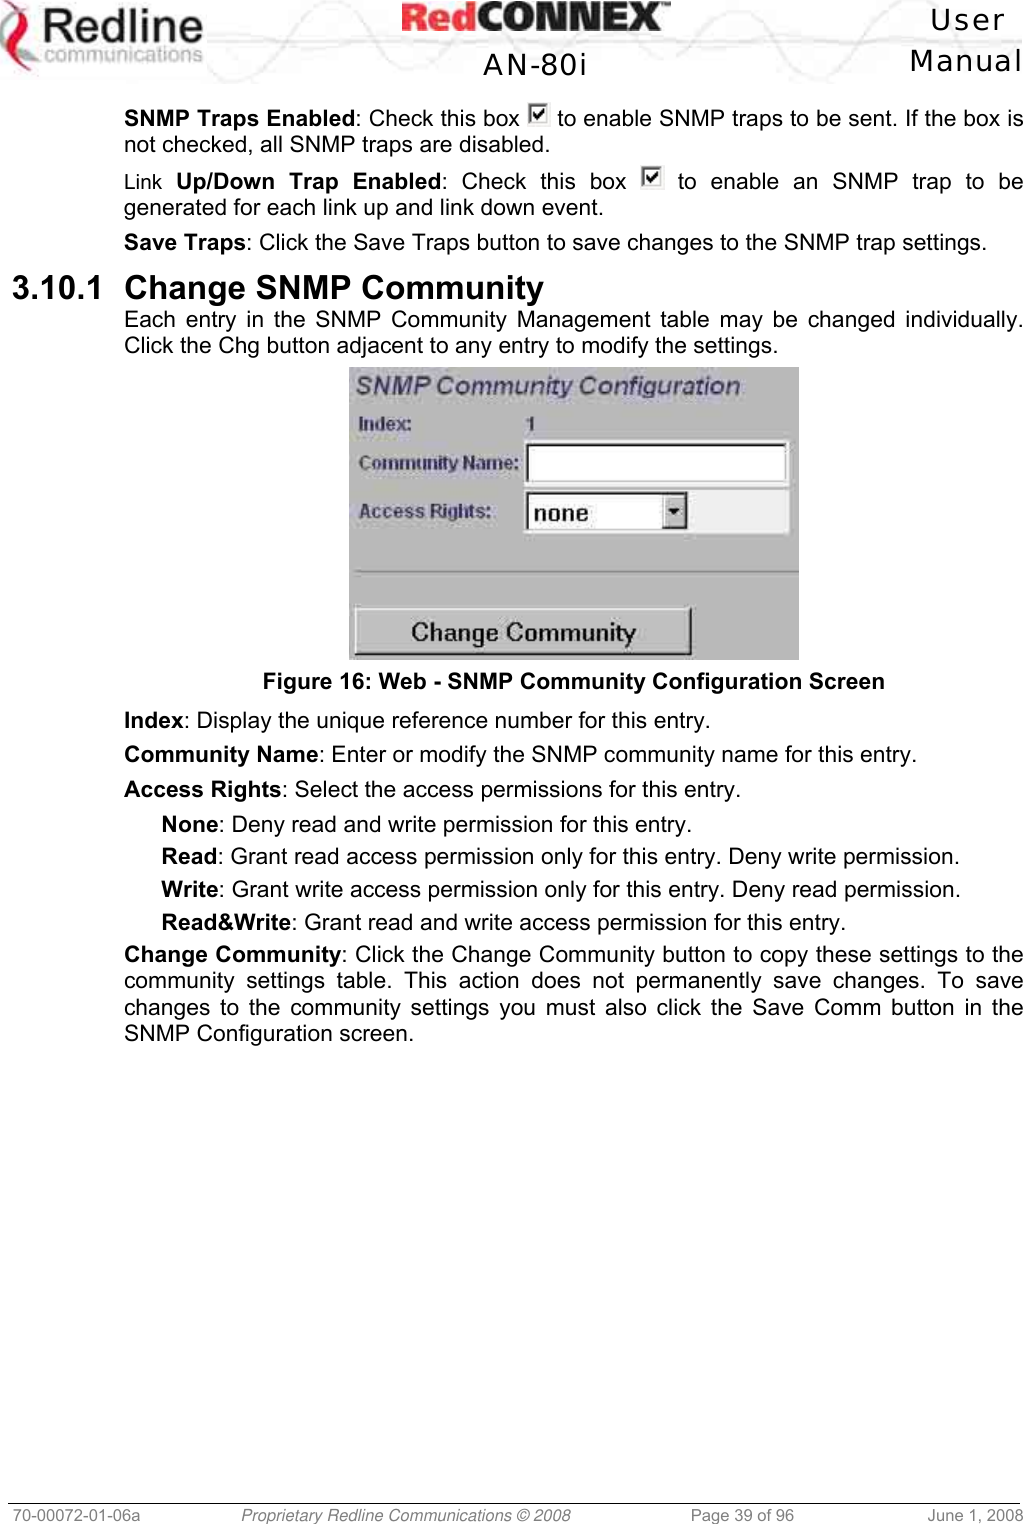   User  AN-80i Manual  70-00072-01-06a  Proprietary Redline Communications © 2008  Page 39 of 96  June 1, 2008 SNMP Traps Enabled: Check this box   to enable SNMP traps to be sent. If the box is not checked, all SNMP traps are disabled. Link Up/Down Trap Enabled: Check this box   to enable an SNMP trap to be generated for each link up and link down event. Save Traps: Click the Save Traps button to save changes to the SNMP trap settings. 3.10.1  Change SNMP Community Each entry in the SNMP Community Management table may be changed individually. Click the Chg button adjacent to any entry to modify the settings.  Figure 16: Web - SNMP Community Configuration Screen  Index: Display the unique reference number for this entry. Community Name: Enter or modify the SNMP community name for this entry. Access Rights: Select the access permissions for this entry. None: Deny read and write permission for this entry. Read: Grant read access permission only for this entry. Deny write permission. Write: Grant write access permission only for this entry. Deny read permission. Read&amp;Write: Grant read and write access permission for this entry. Change Community: Click the Change Community button to copy these settings to the community settings table. This action does not permanently save changes. To save changes to the community settings you must also click the Save Comm button in the SNMP Configuration screen. 